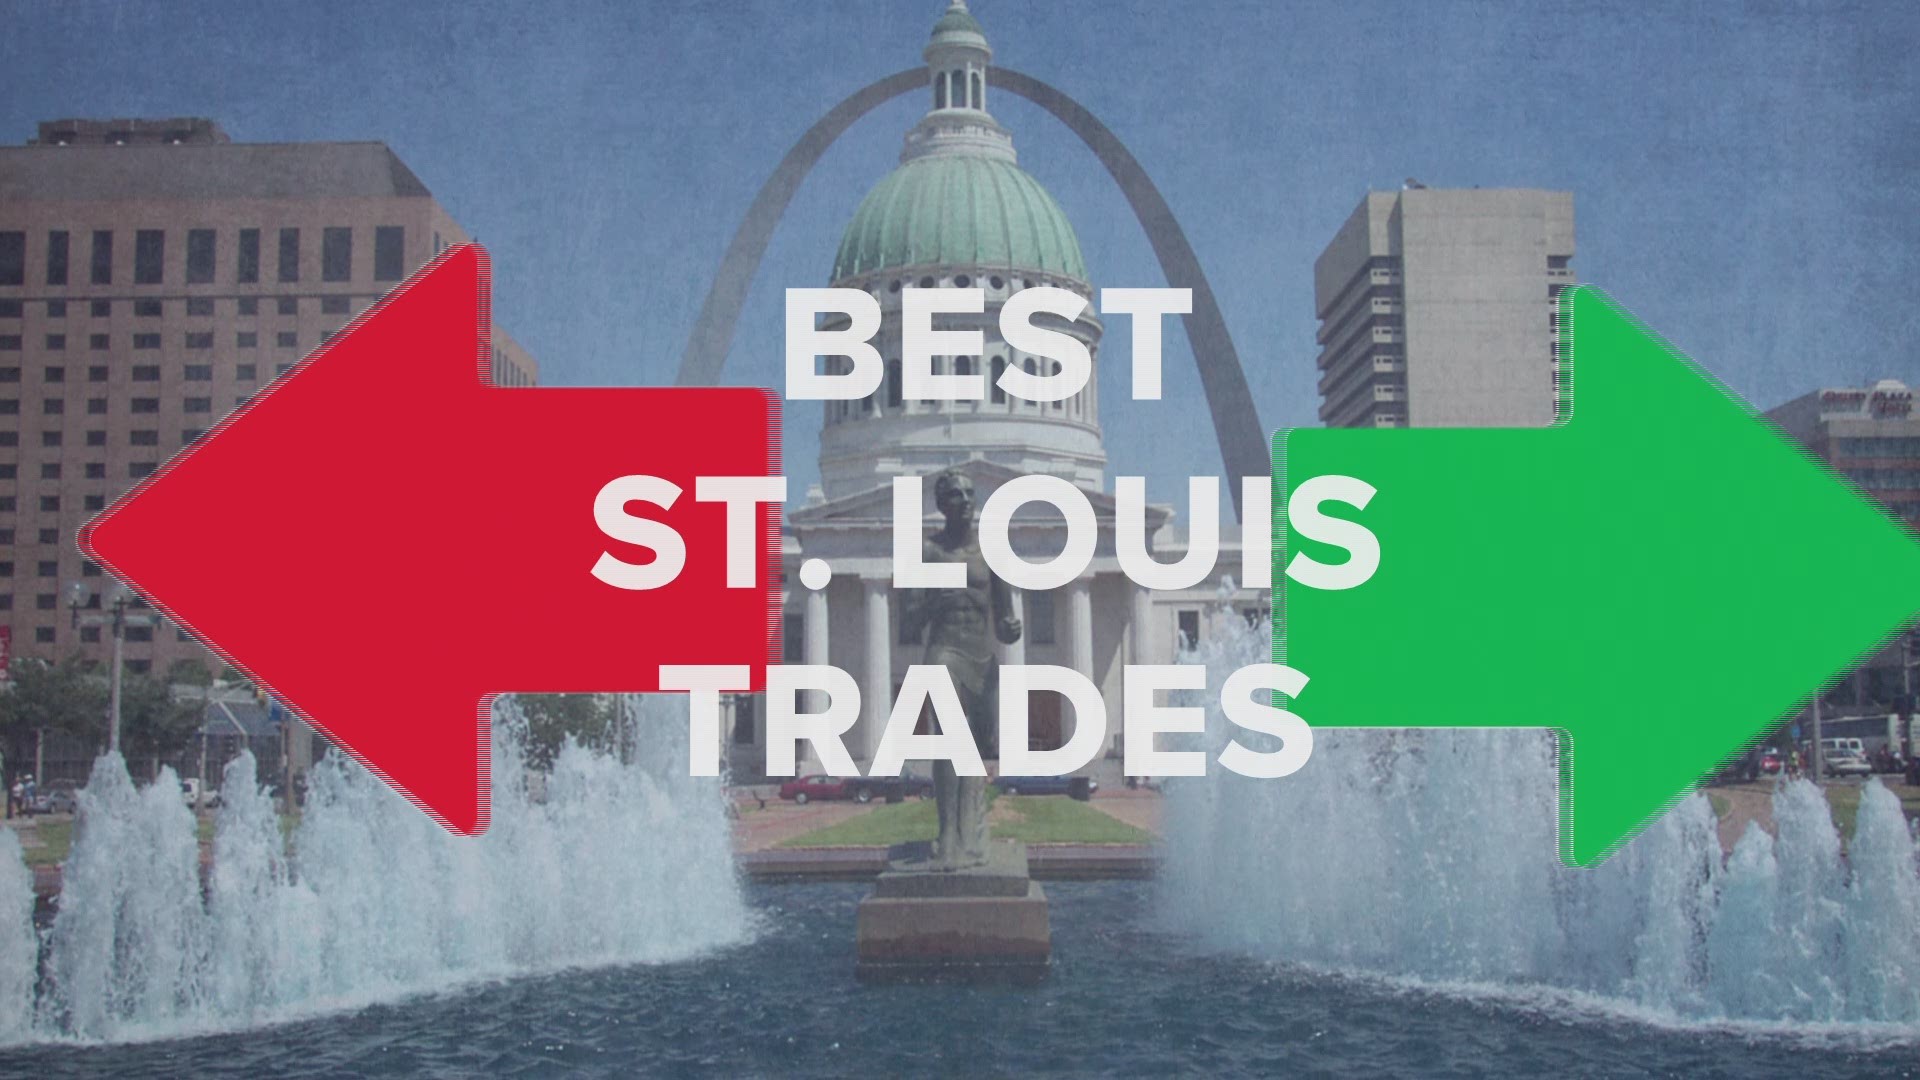 St. Louis teams have made some big trades over the years. But which is the most influential? We count them down.